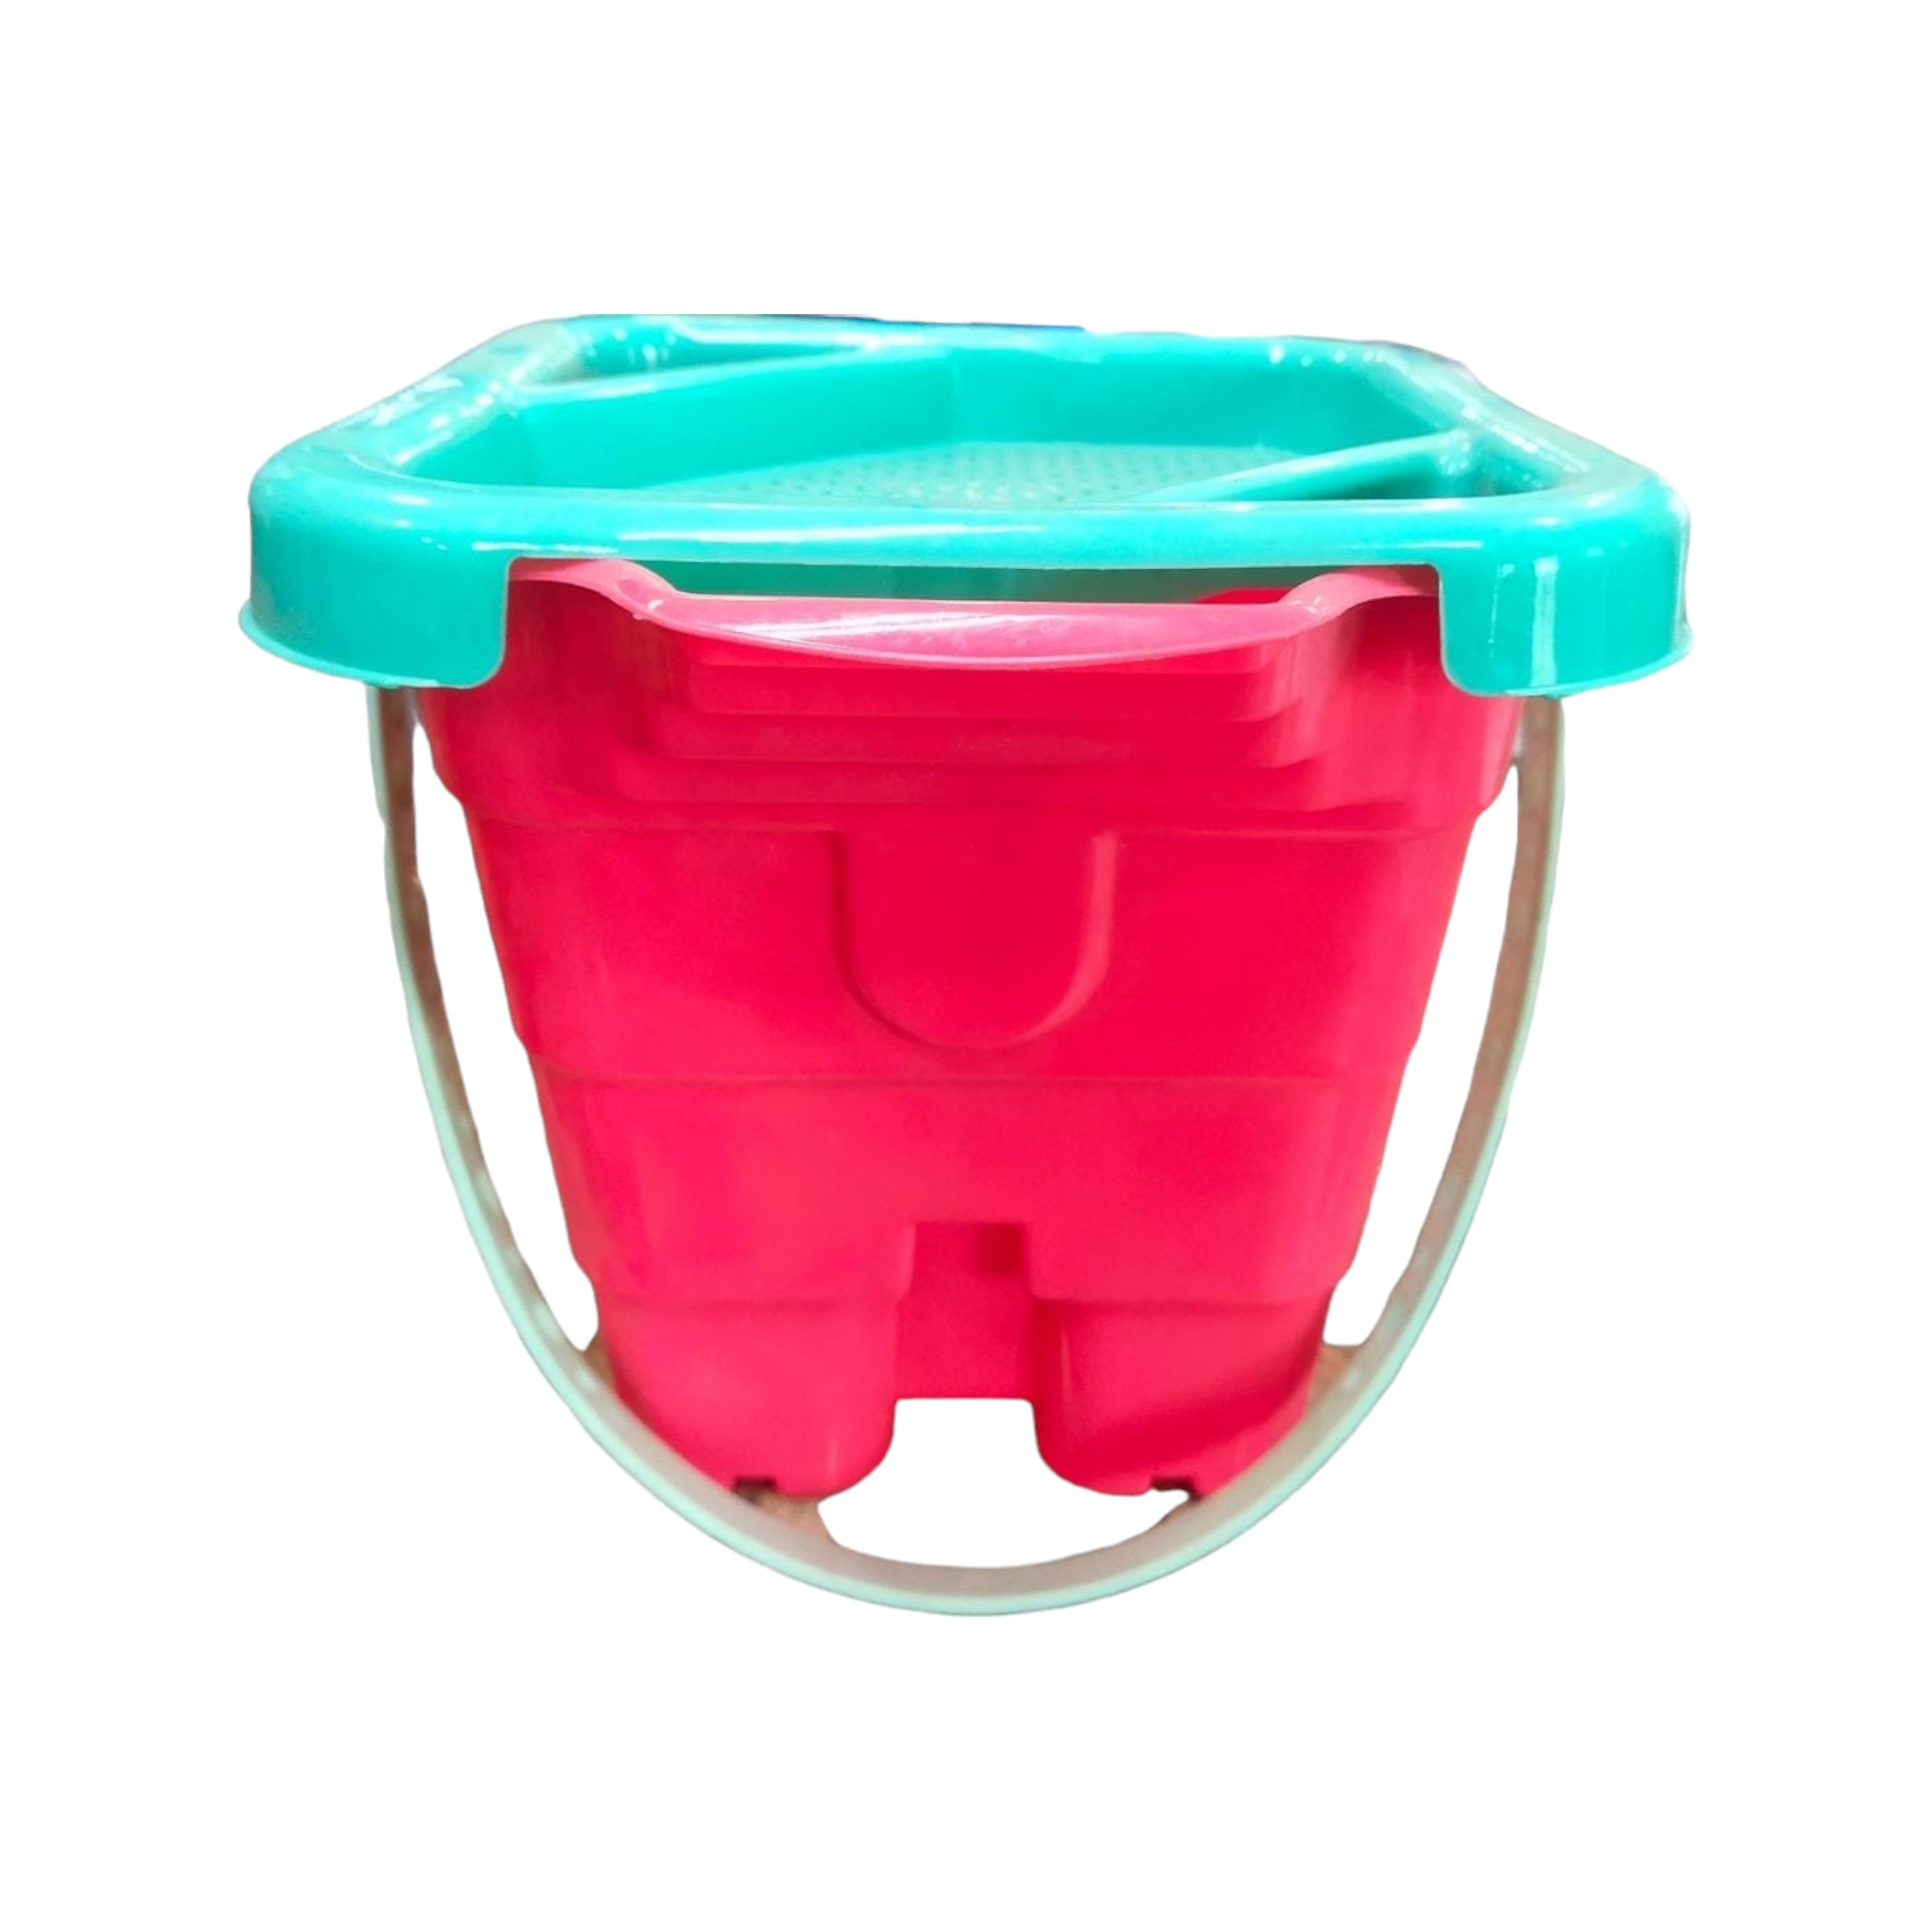 Kiddies Beach Bucket Square with Toys Combo